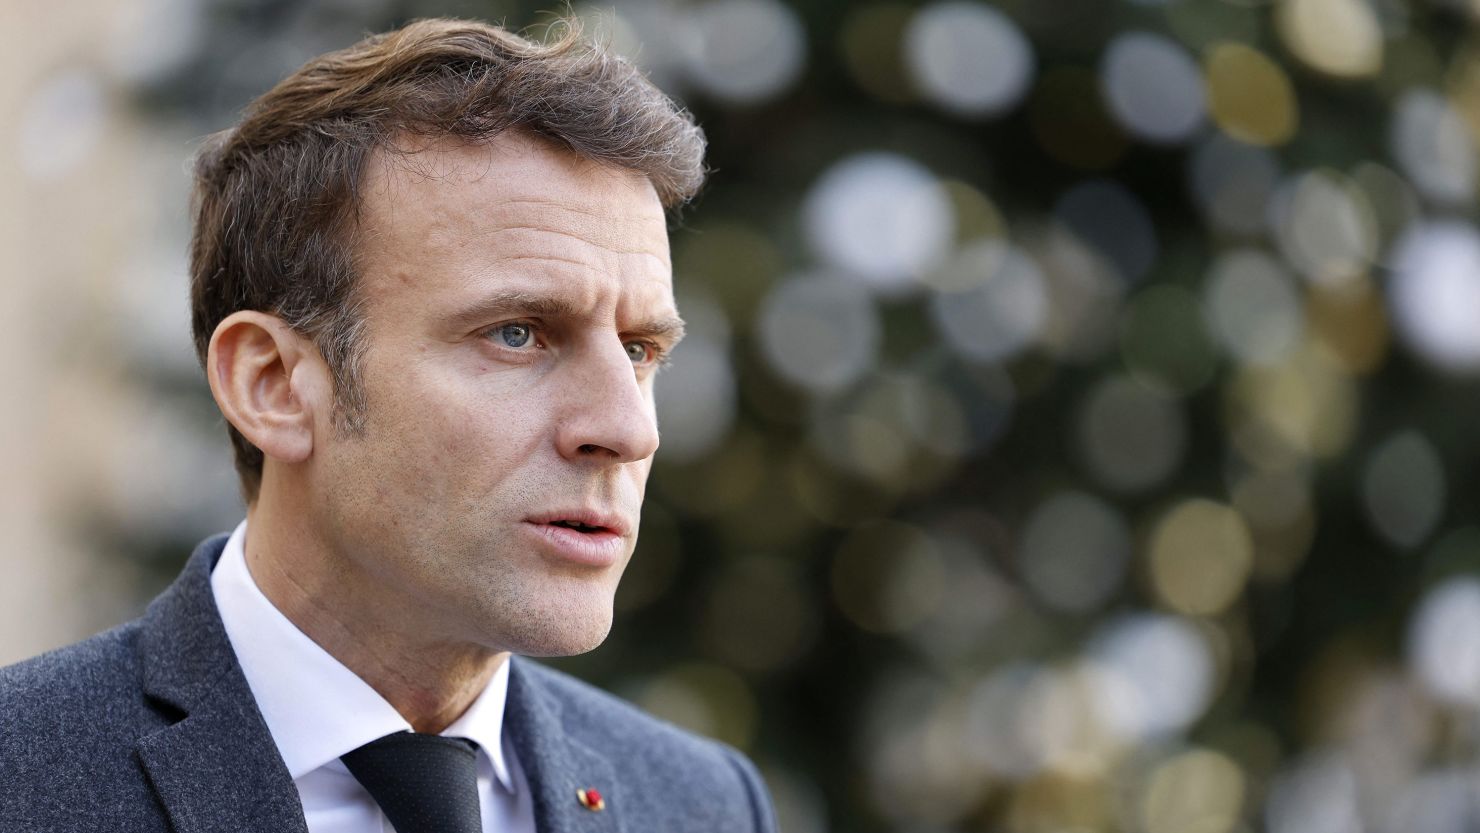 France's President Emmanuel Macron plans to raise the official retirement age from 62 to 64.